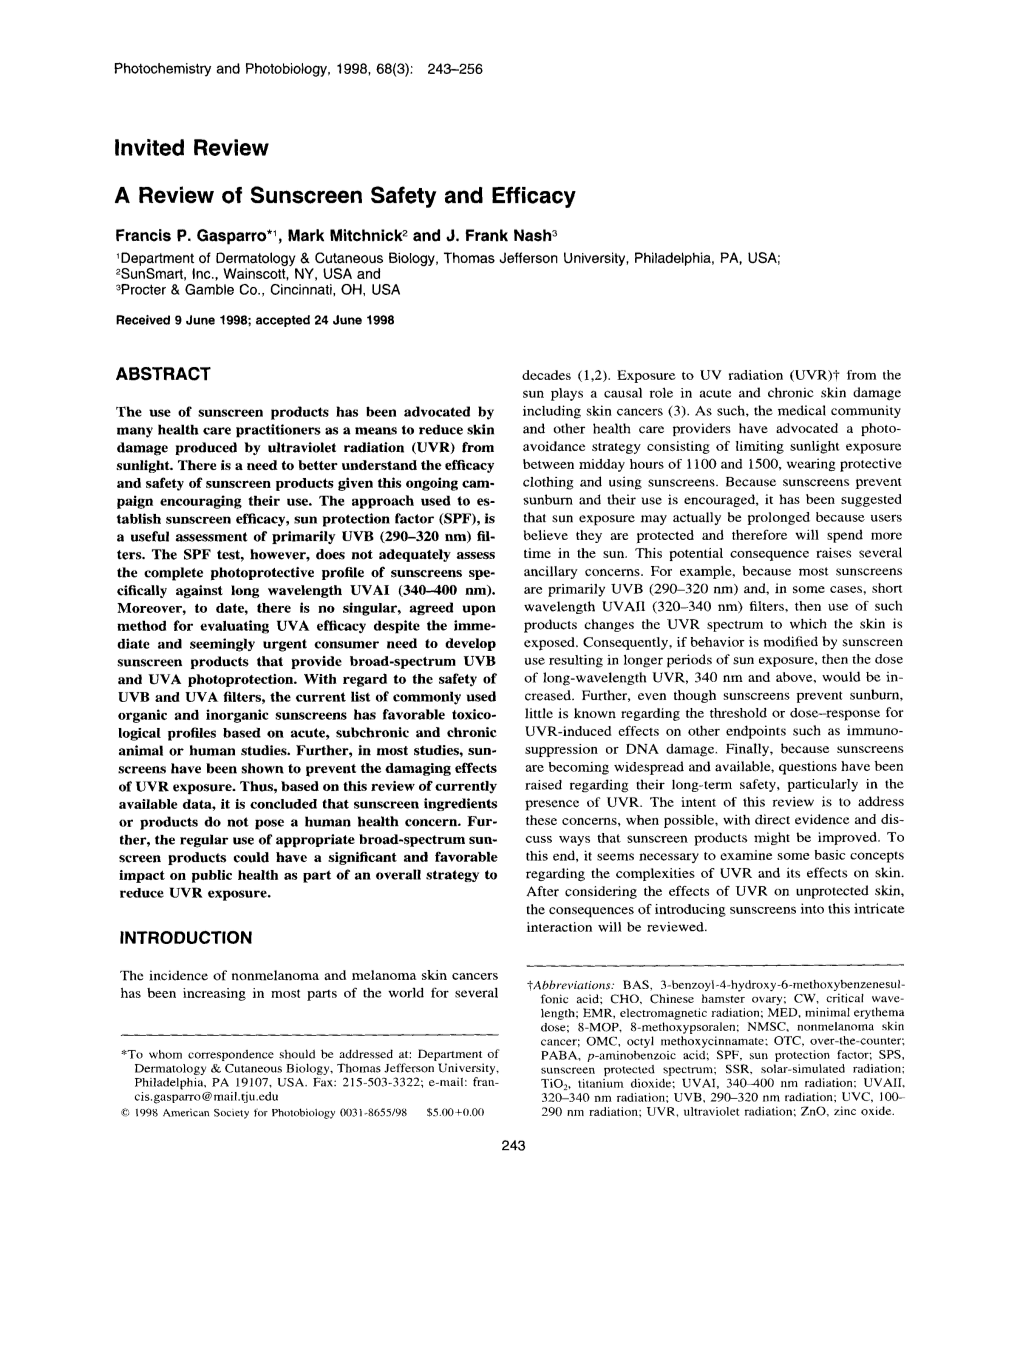 Invited Review a Review of Sunscreen Safety and Efficacy